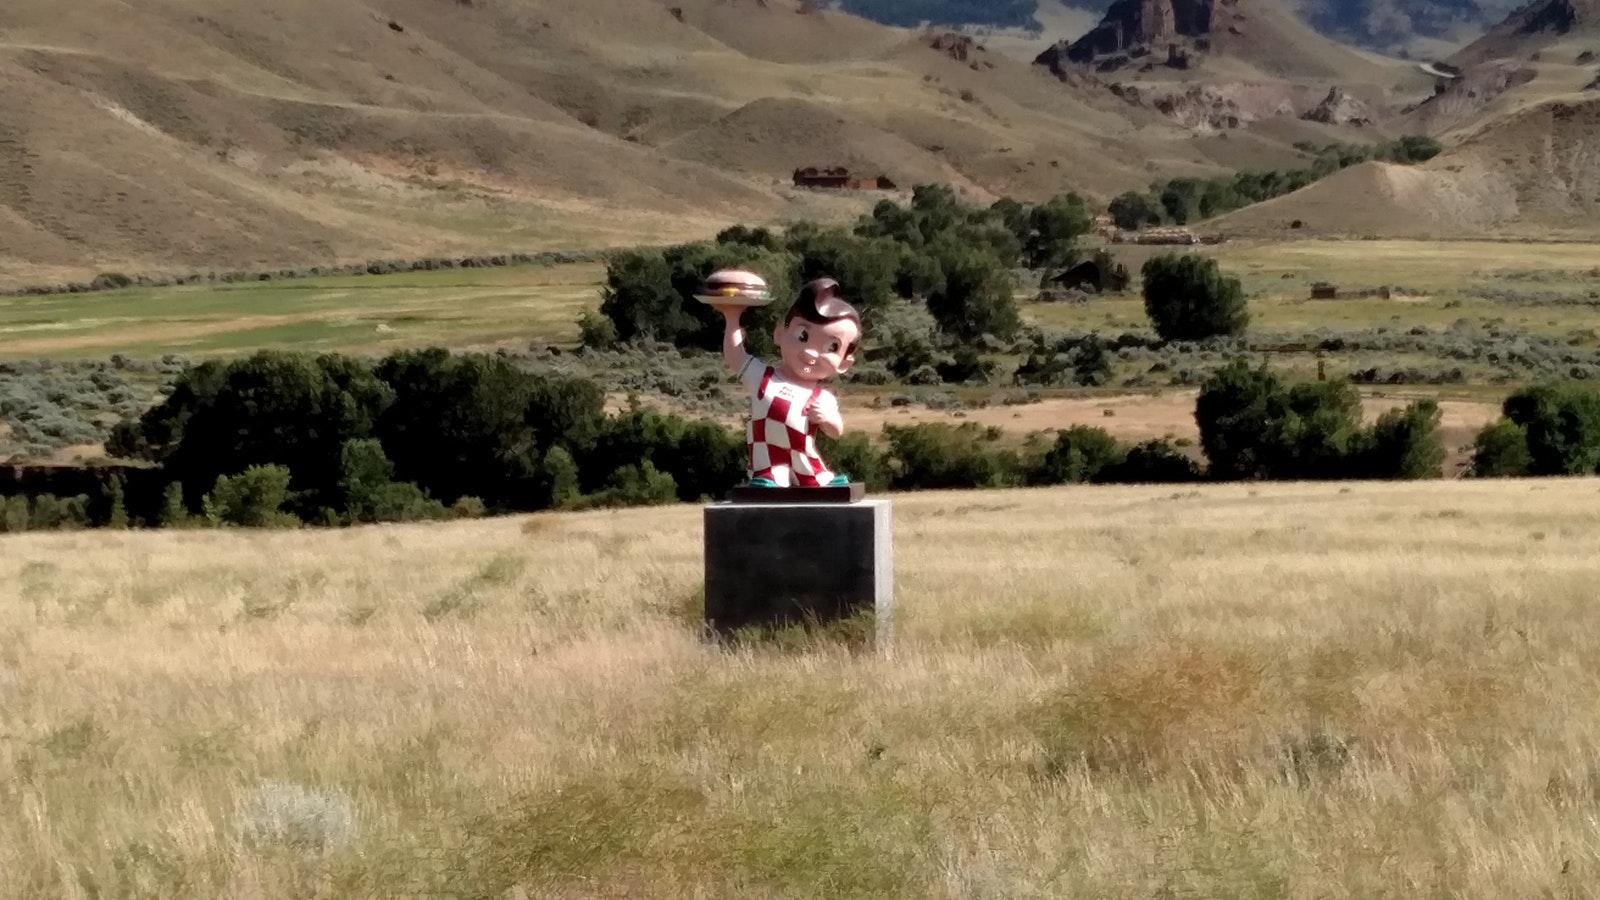 Big Boy stands alone in a field on a cement pedestal about 20 miles west of Cody along U.S. 14/16/20 on the way to and front the East Entrance of Yellowstone National Park.